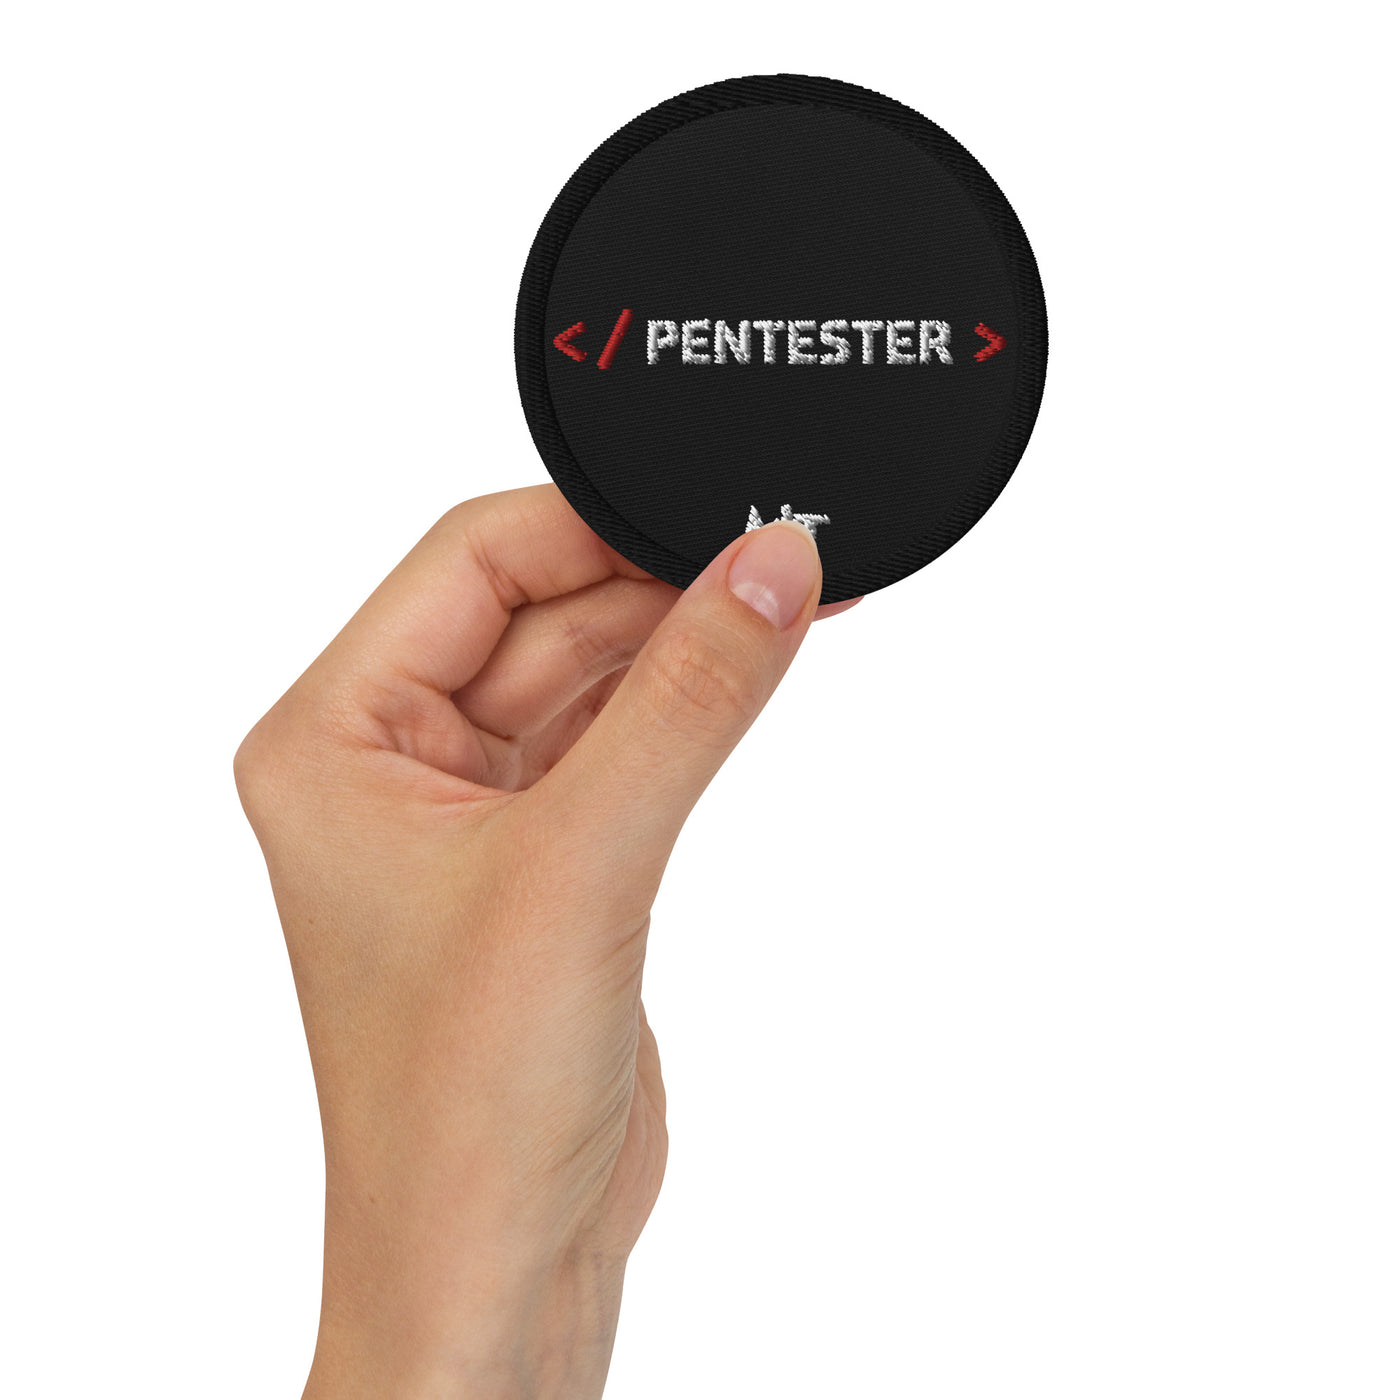 Pentester V1 - Embroidered patches